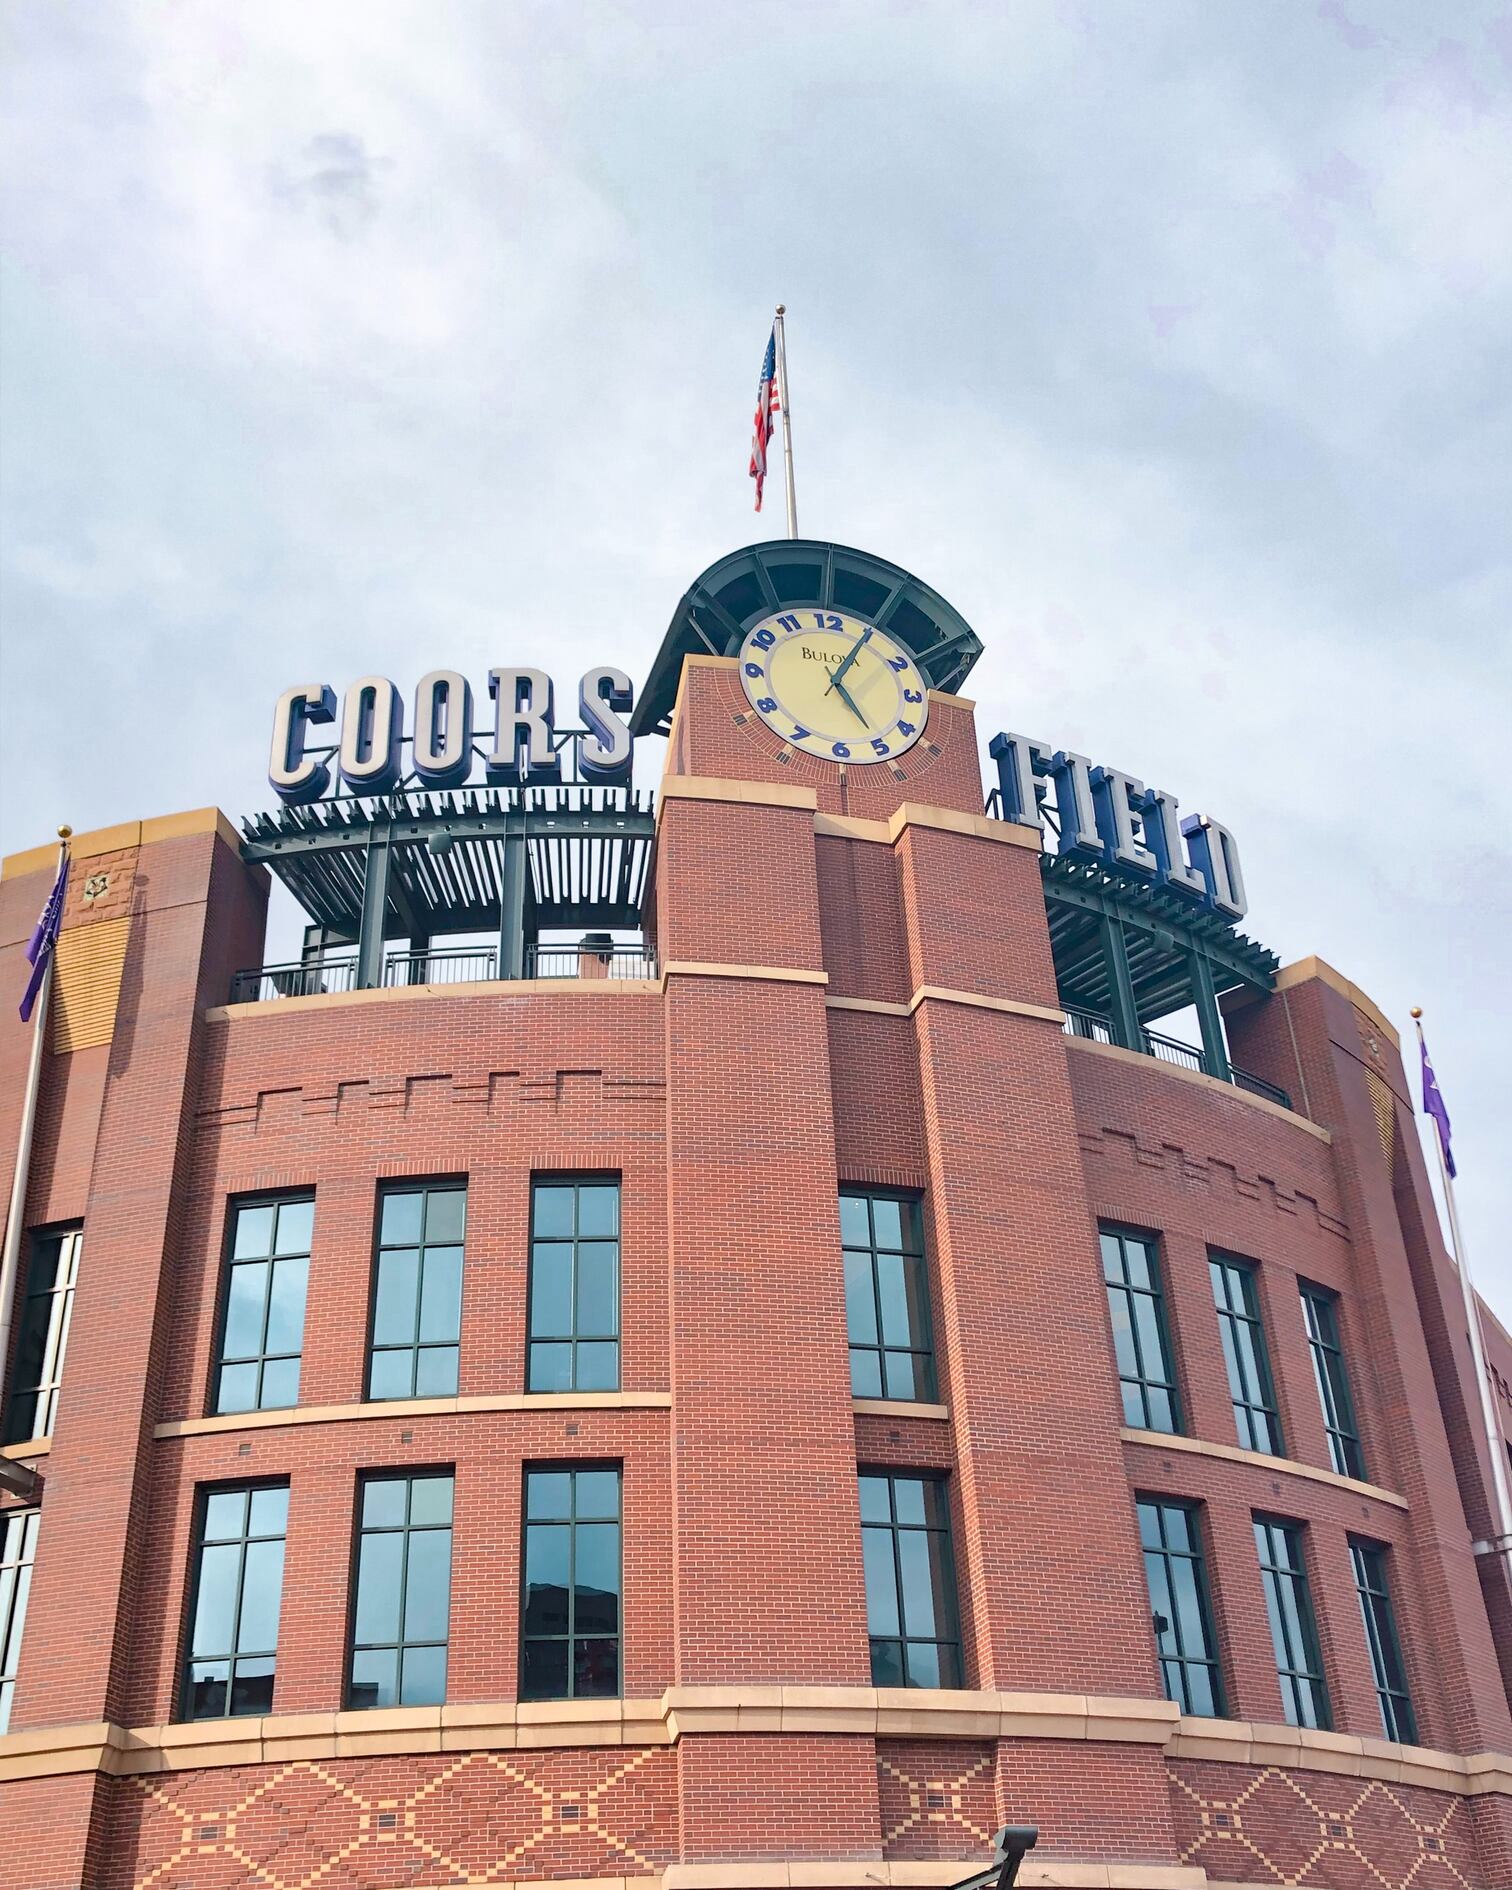 Coors Field baseball stadium near Barclay downtown Denver condos is brick with windows, a large clock, and a flag.